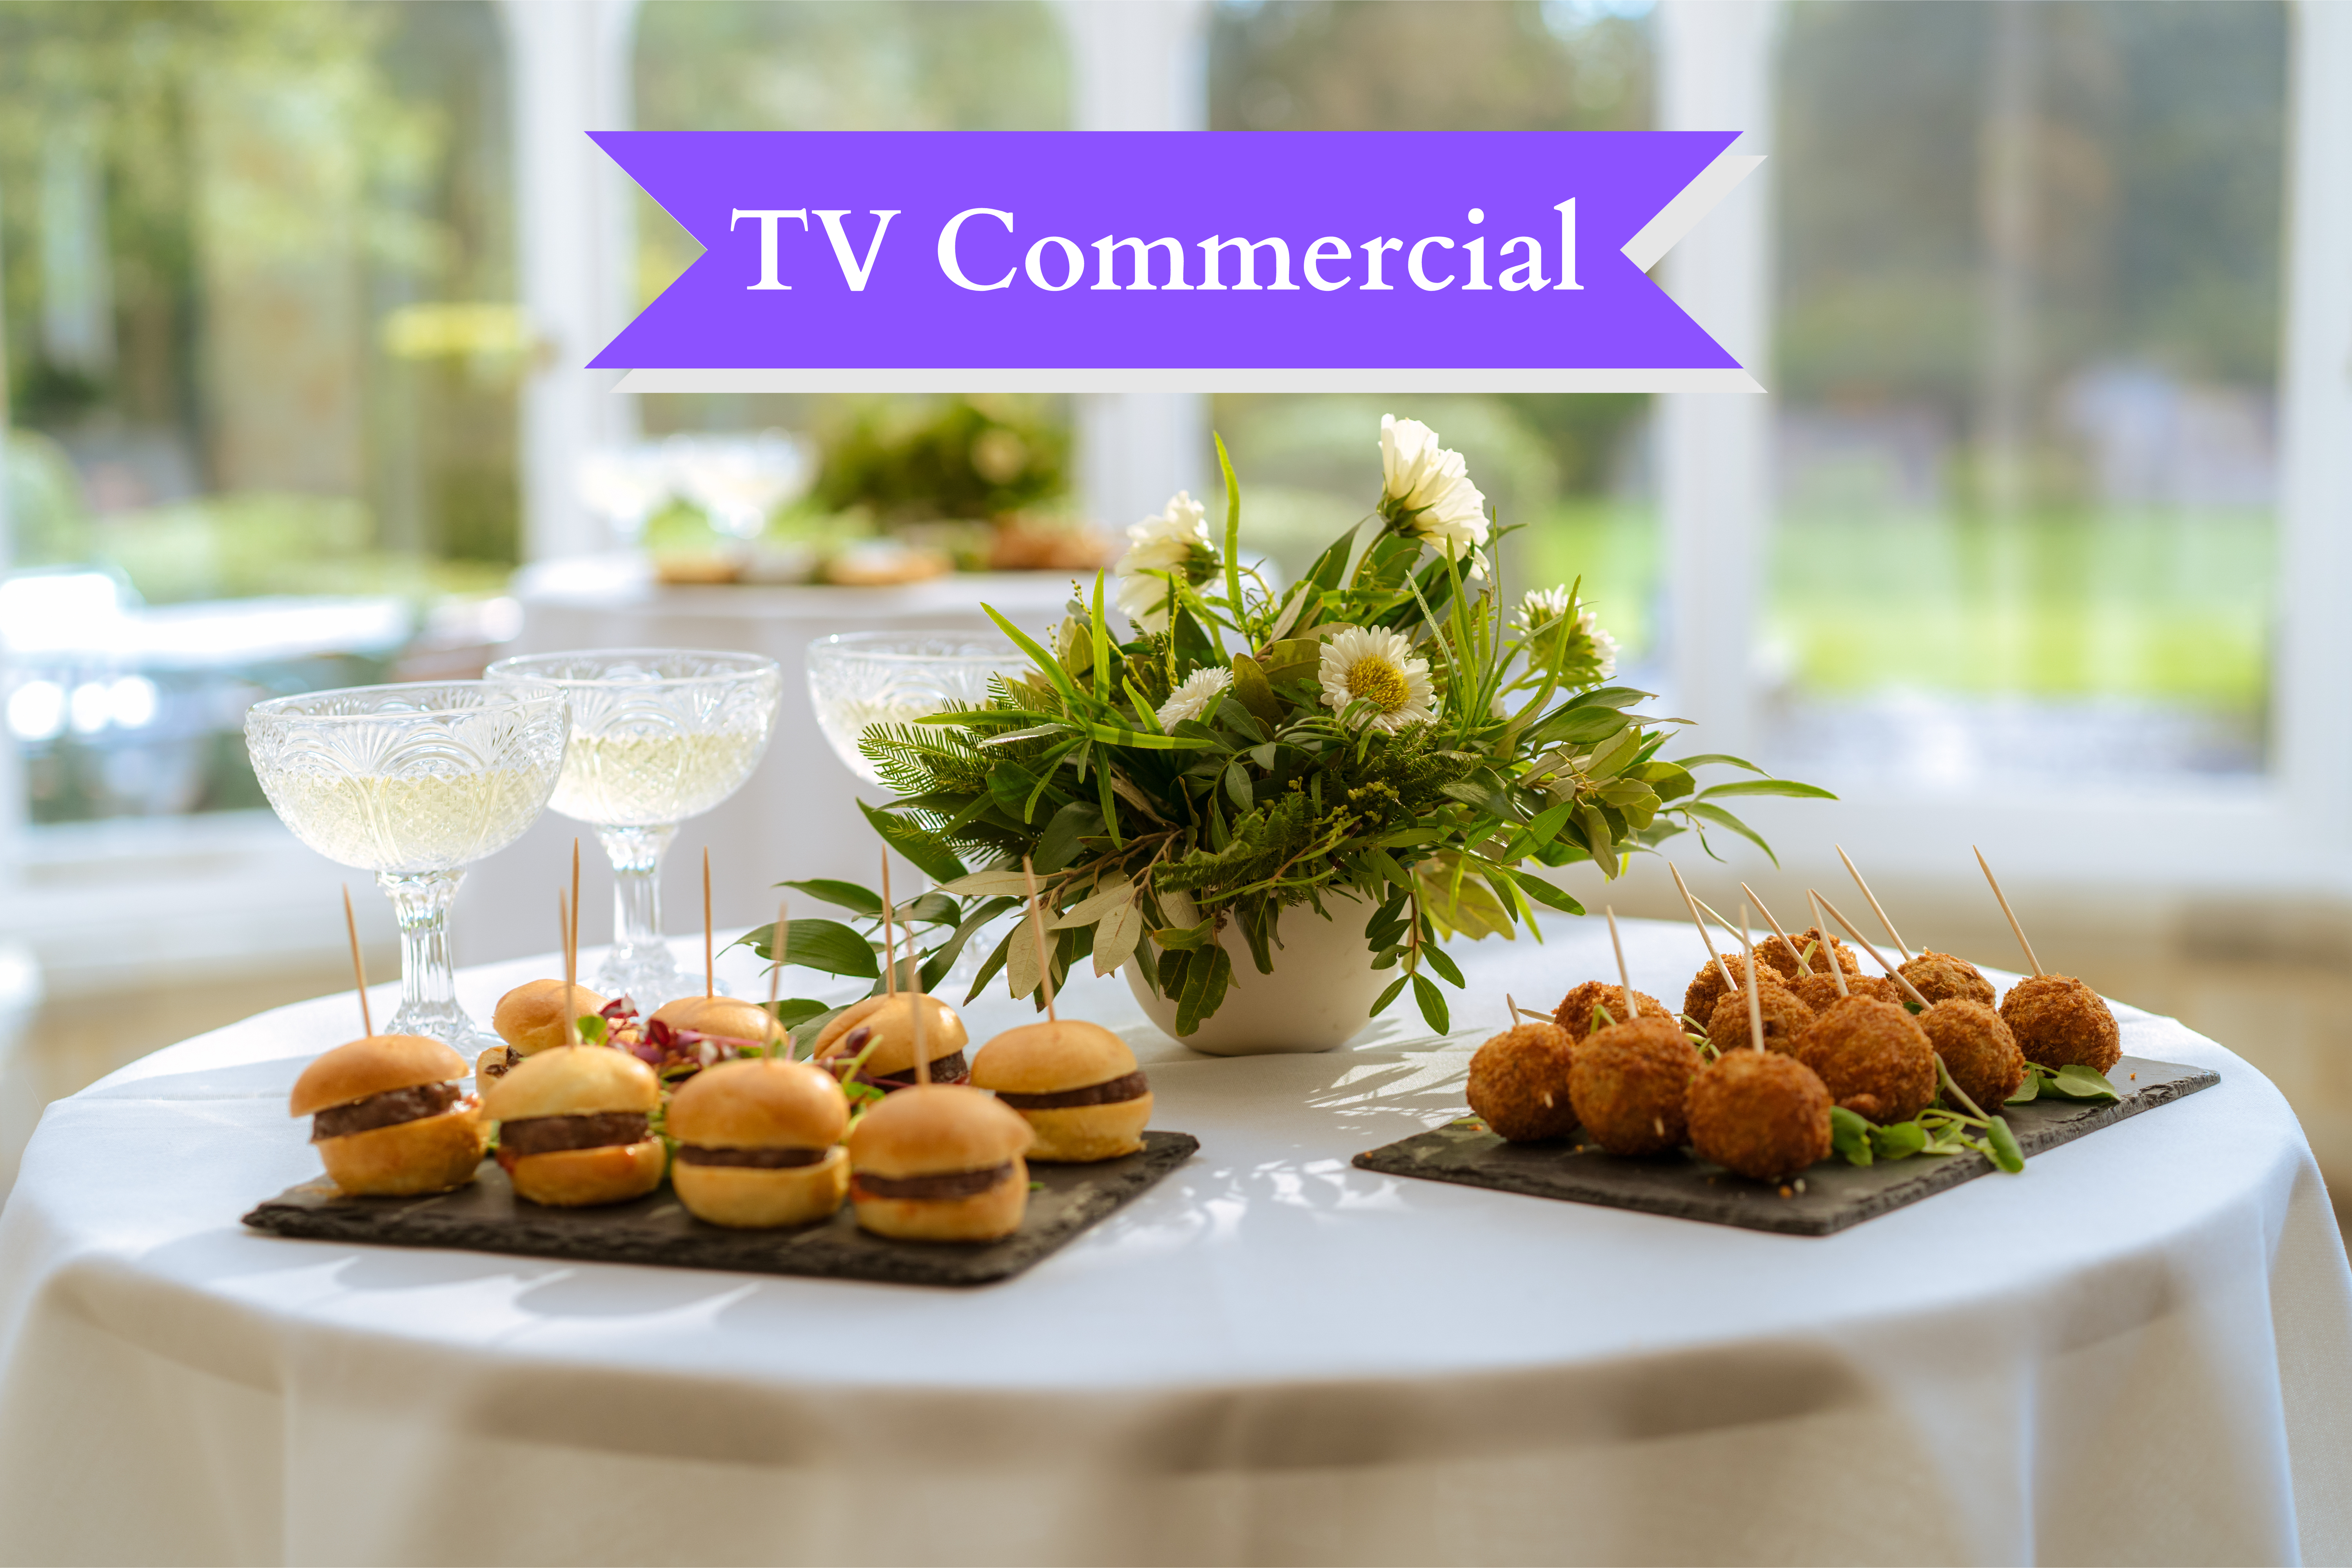 TV Commercial – Bryngarw House